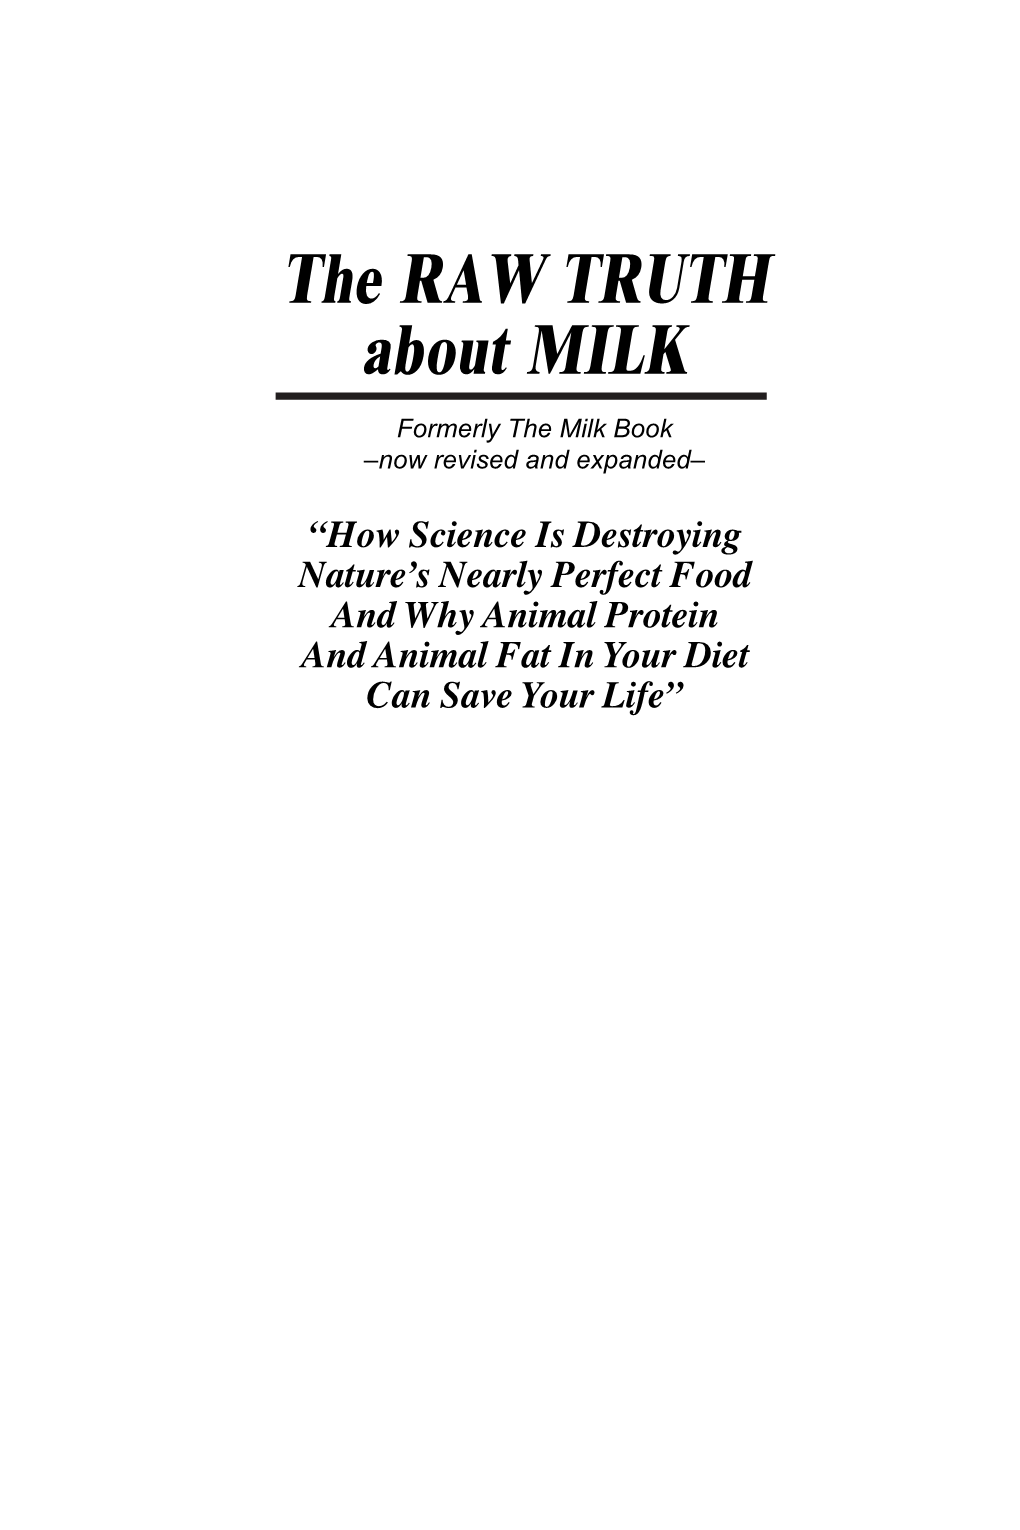 The RAW TRUTH About MILK